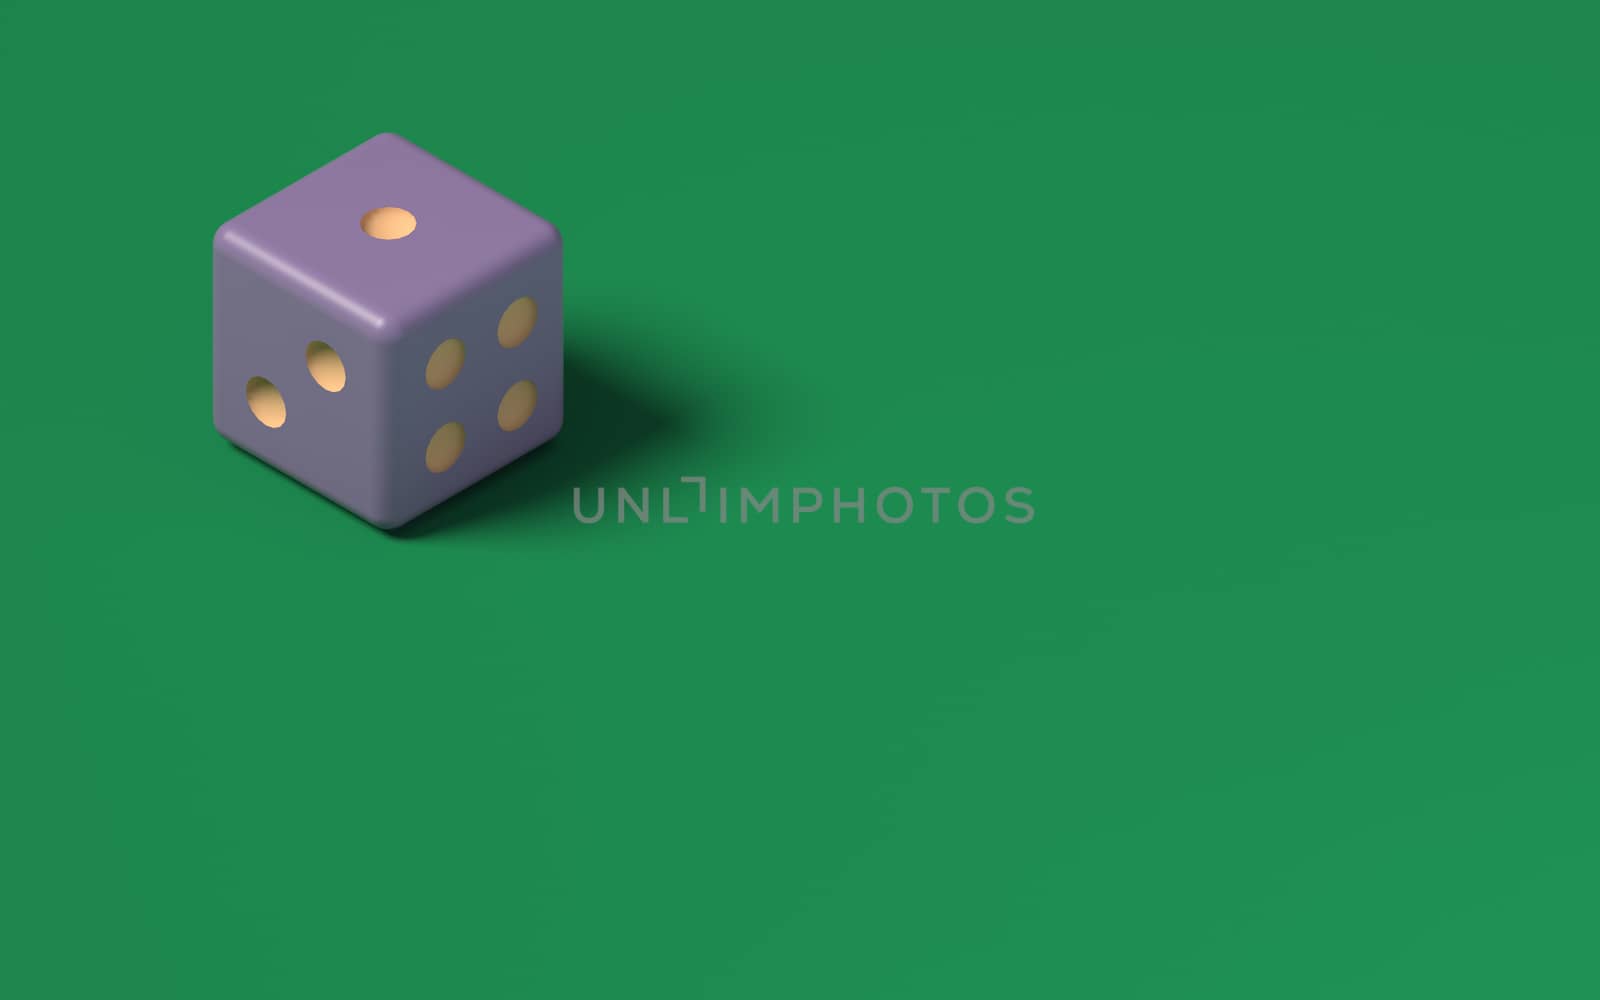 DICE ISOLATED ON PLAIN BACKGROUND by PrettyTG